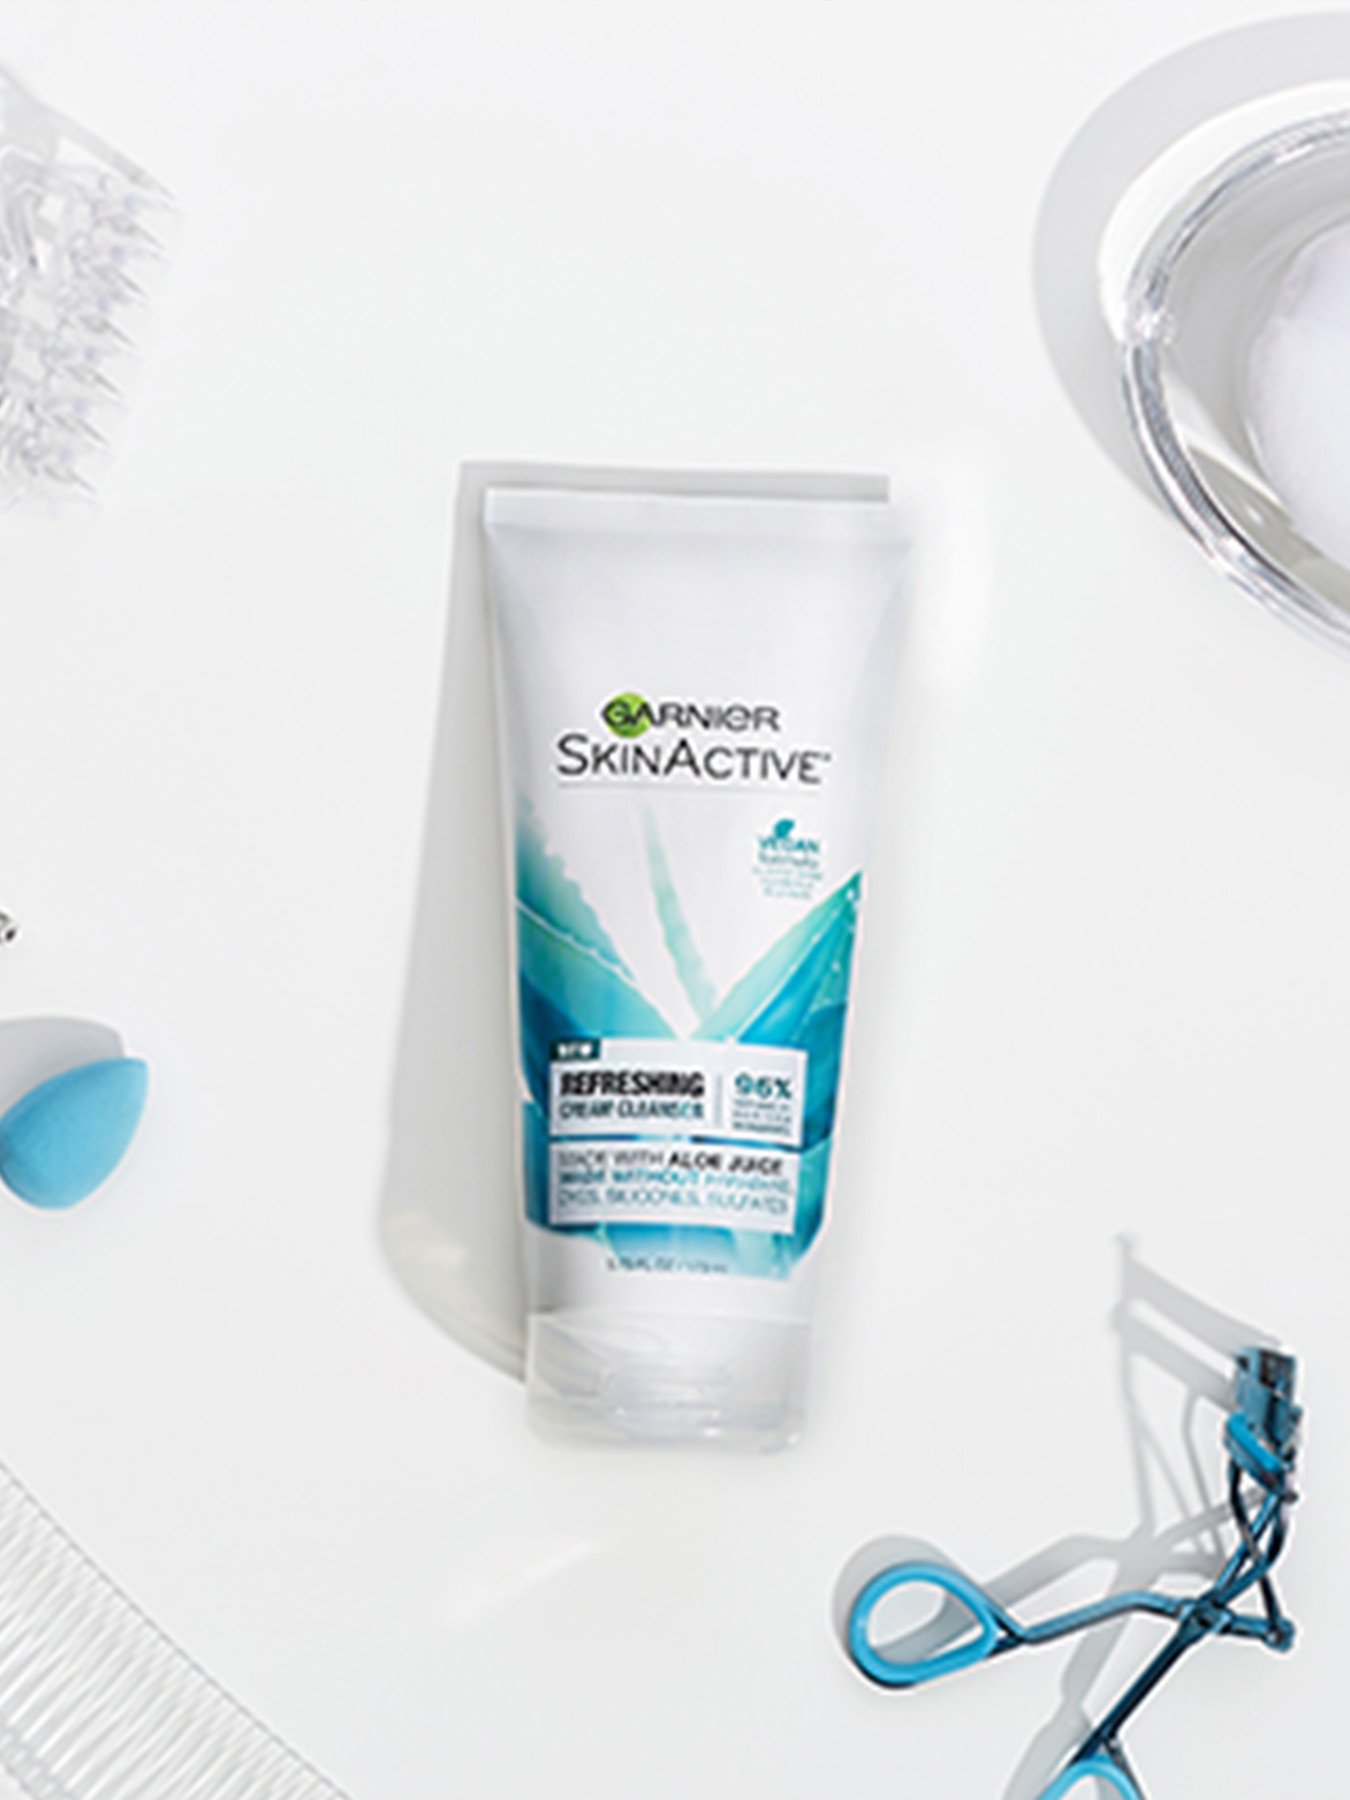 Garnier SkinActive Refreshing Cream Face Wash with Aloe on a white background with a clear glass dish, blue eyebrow crimpers, a clear comb, a clear hair clip, and a blue makeup sponge.